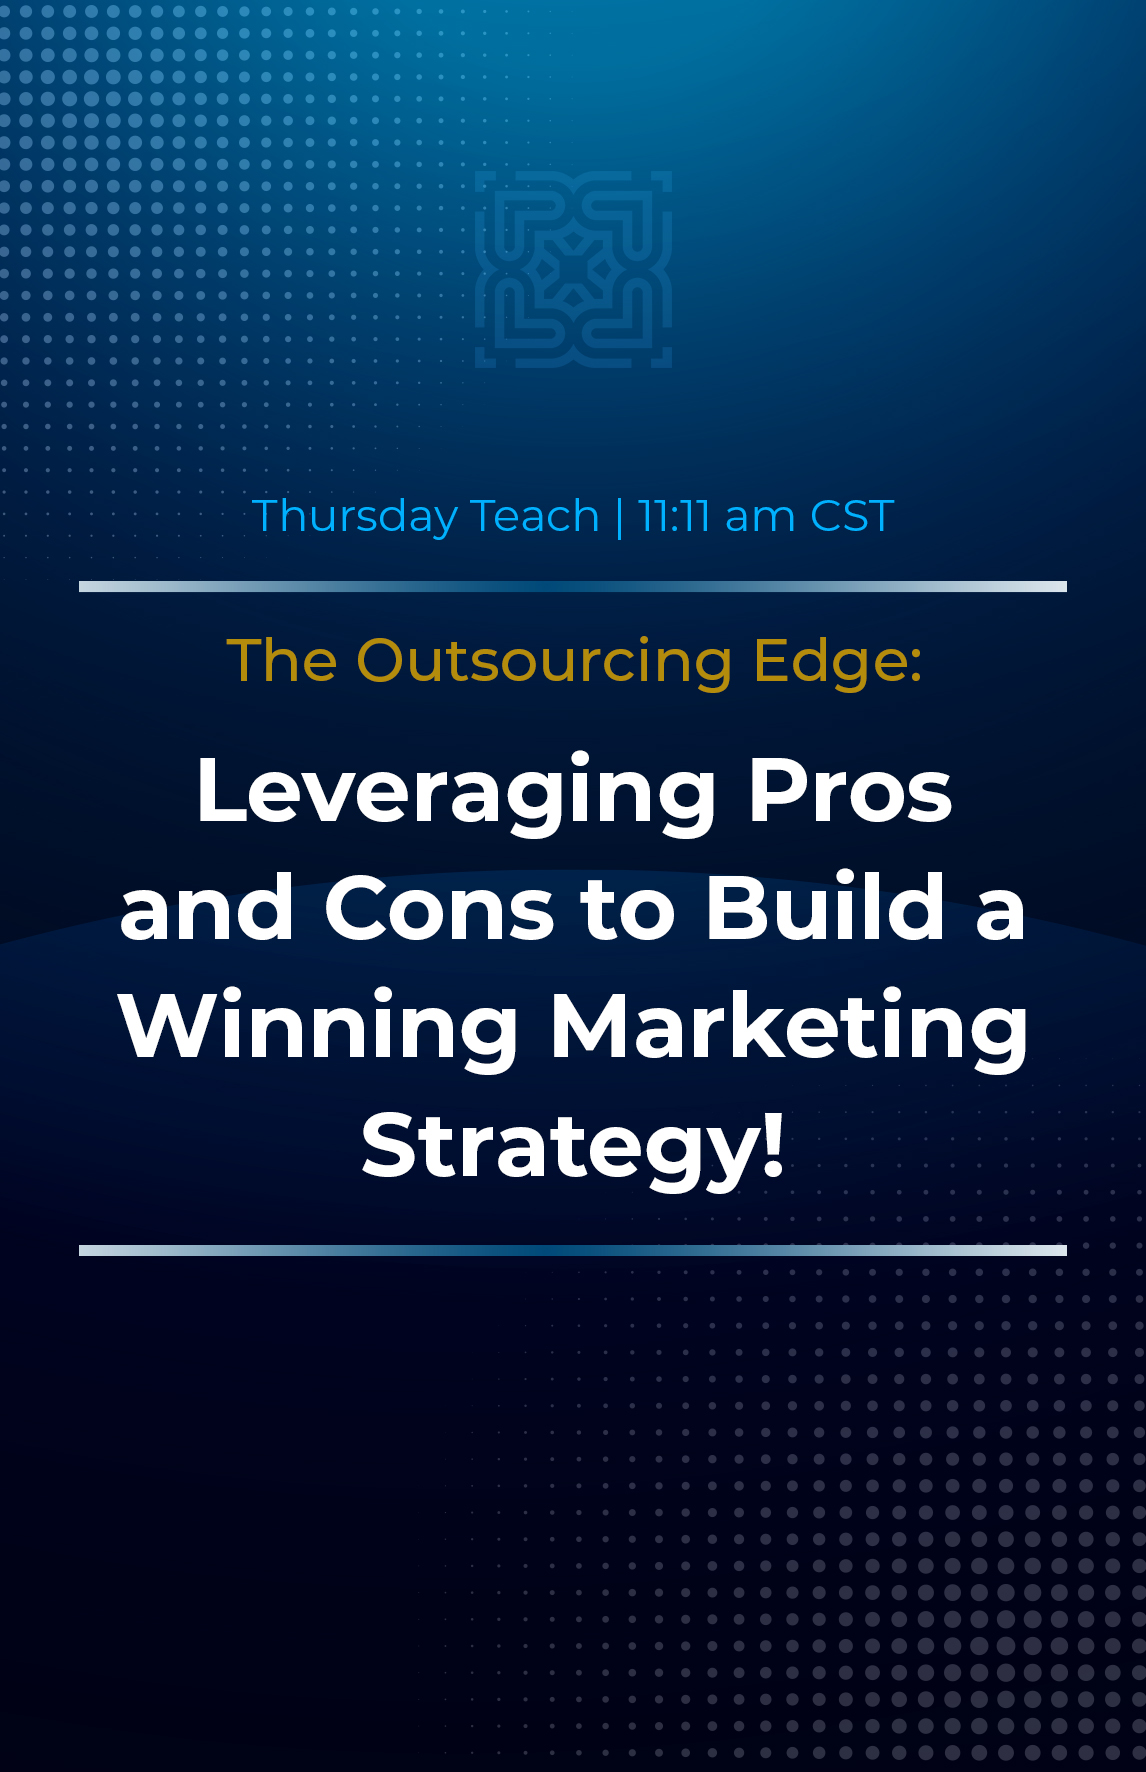 Leveraging Pros and Cons to Build a Winning Marketing Strategy